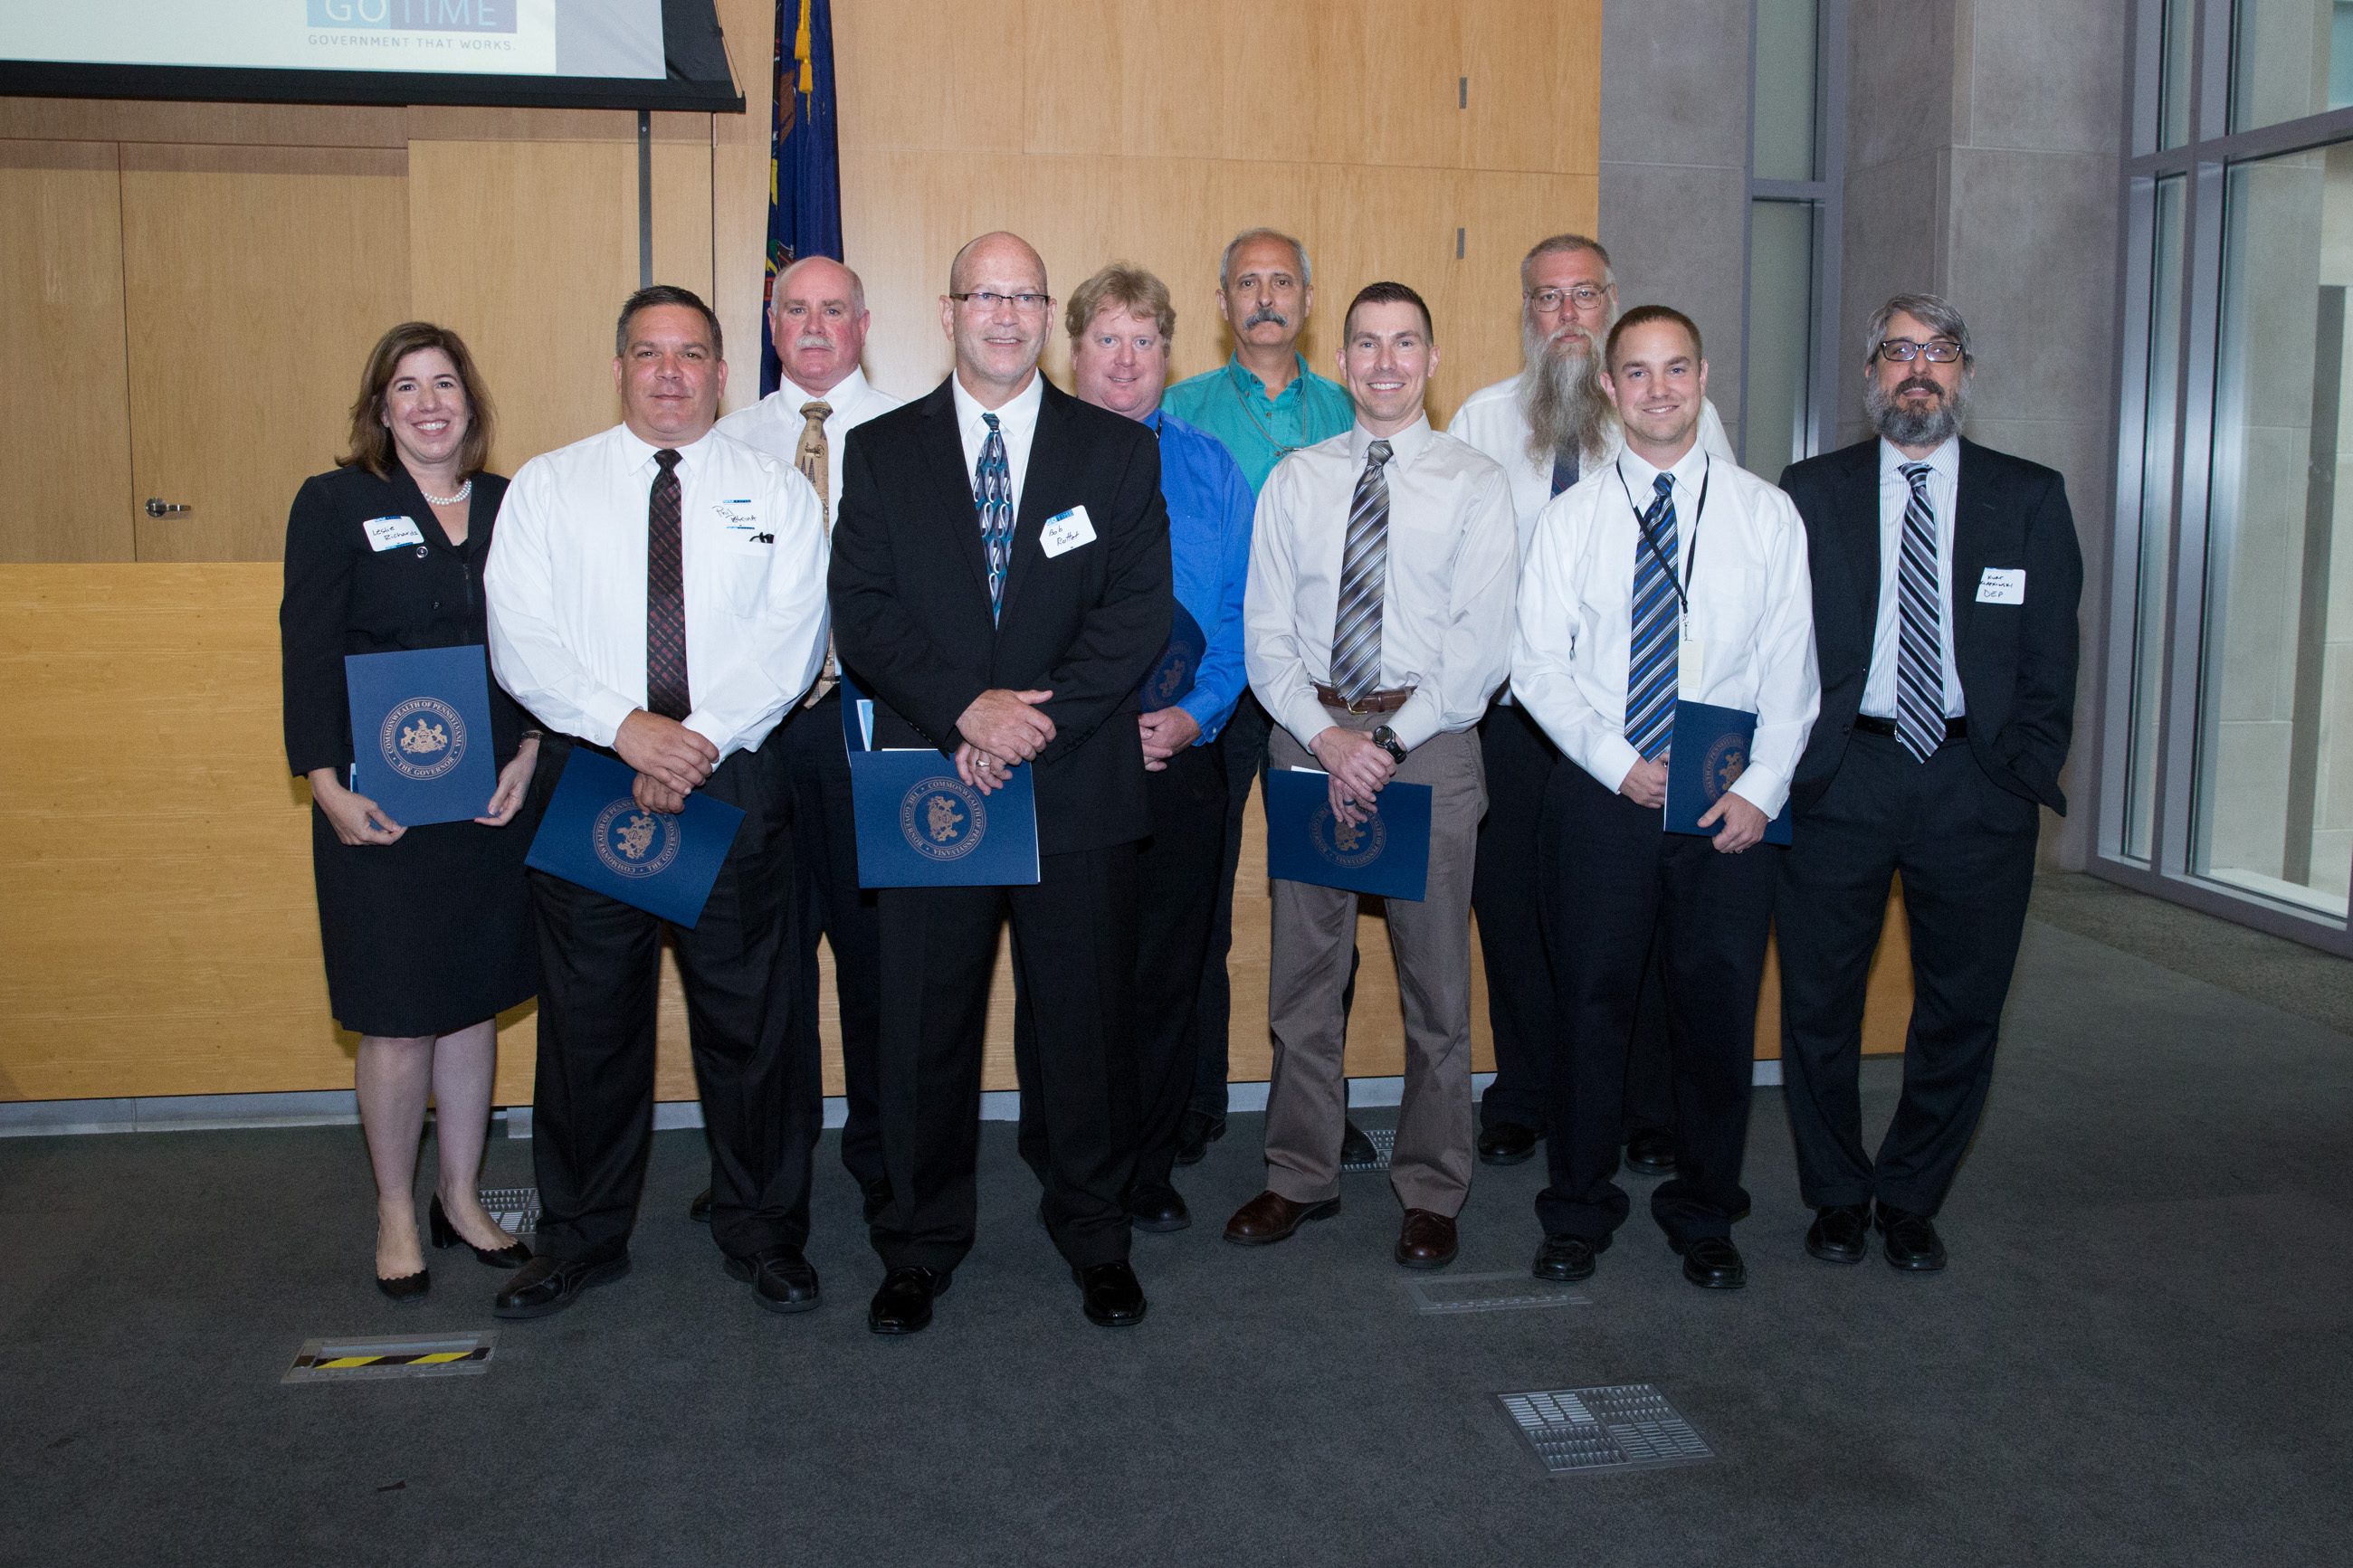 penndot and dep staff receive a go-time award for streamlining oil and gas inspections with mobile technology